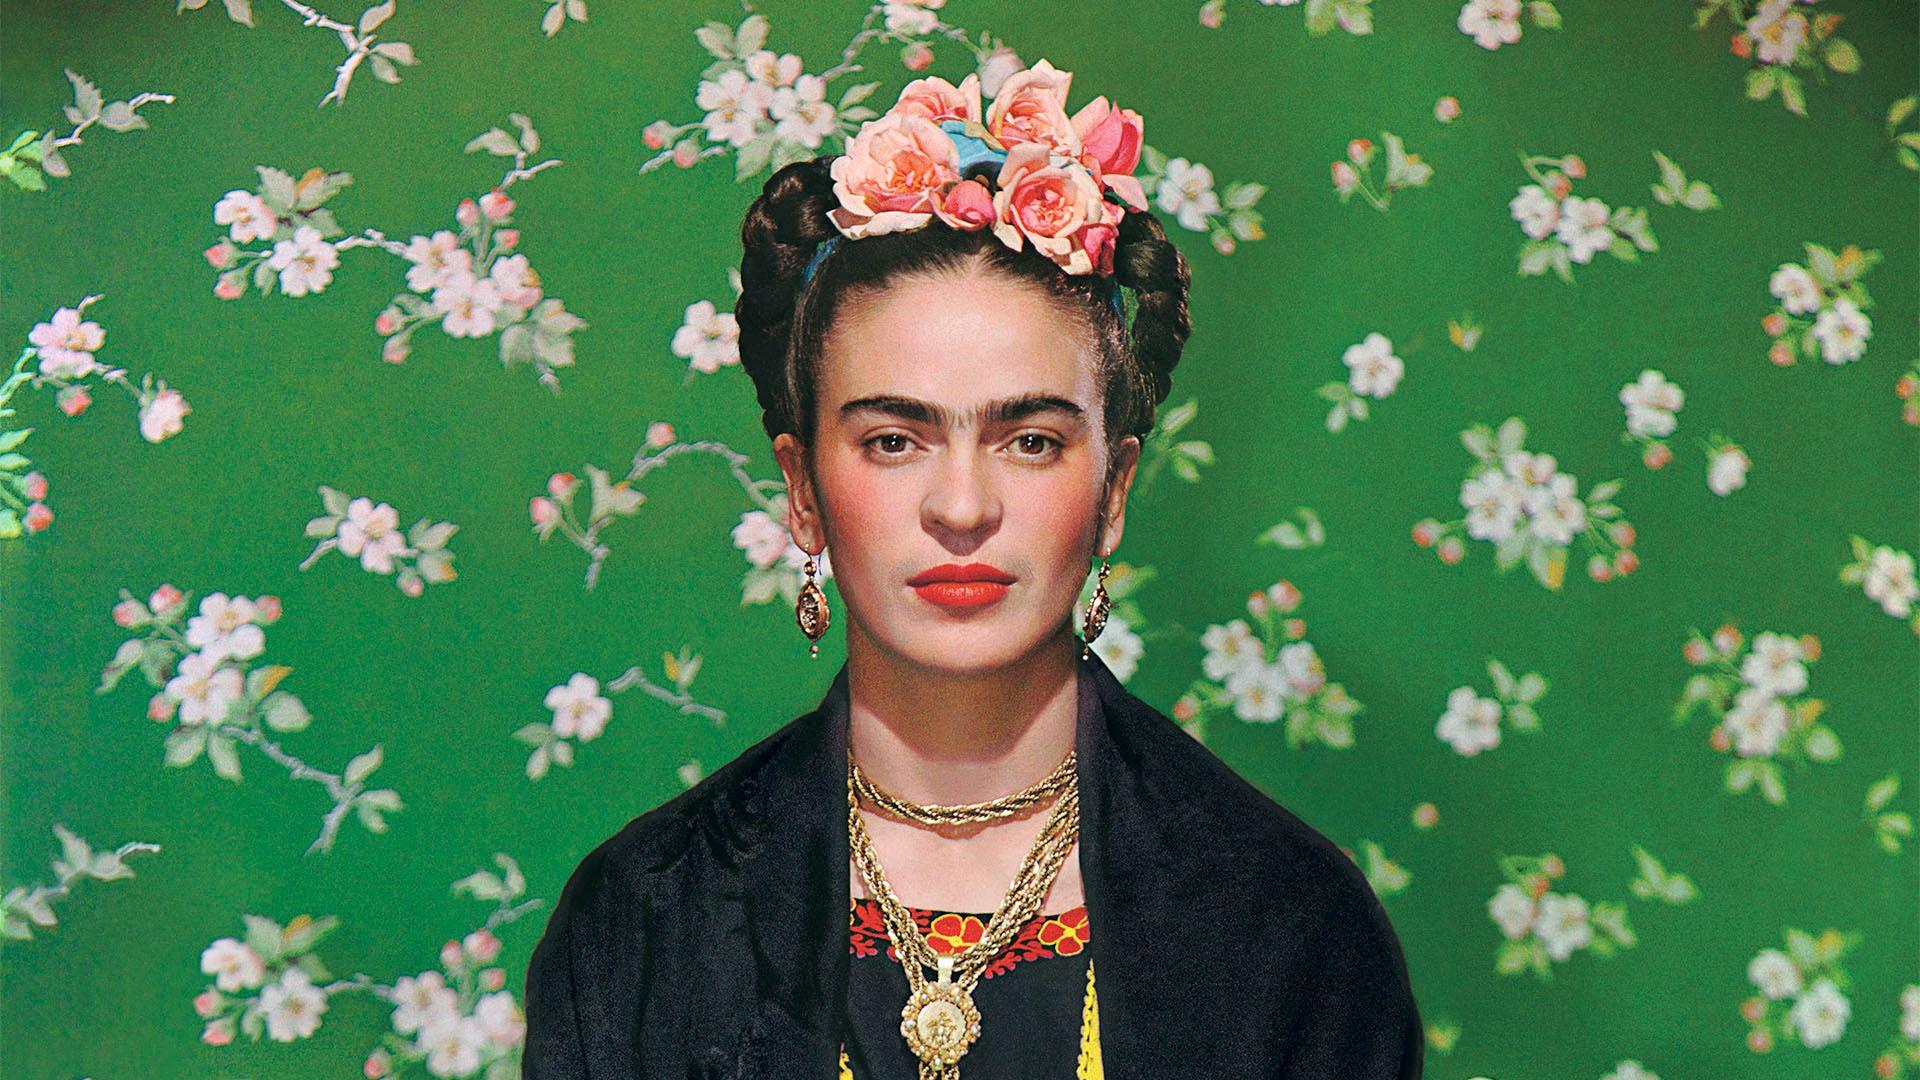 Frida Kahlo with roses in her hair, green floral patter in background